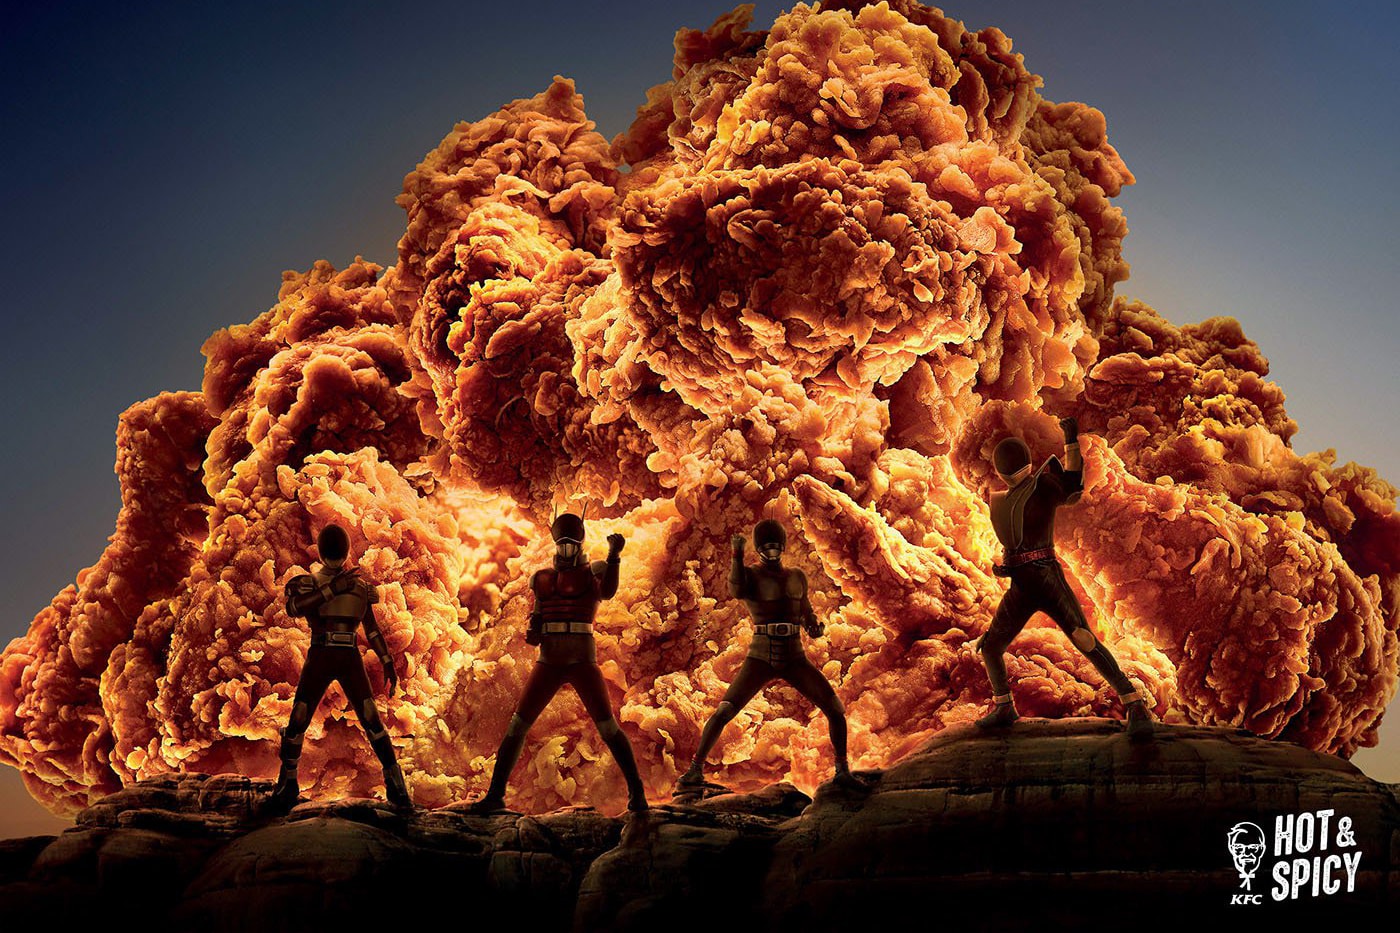 KFC Hong Kong Hot Spicy Fried Chicken Fiery Explosions ad campaign ogilvy mather